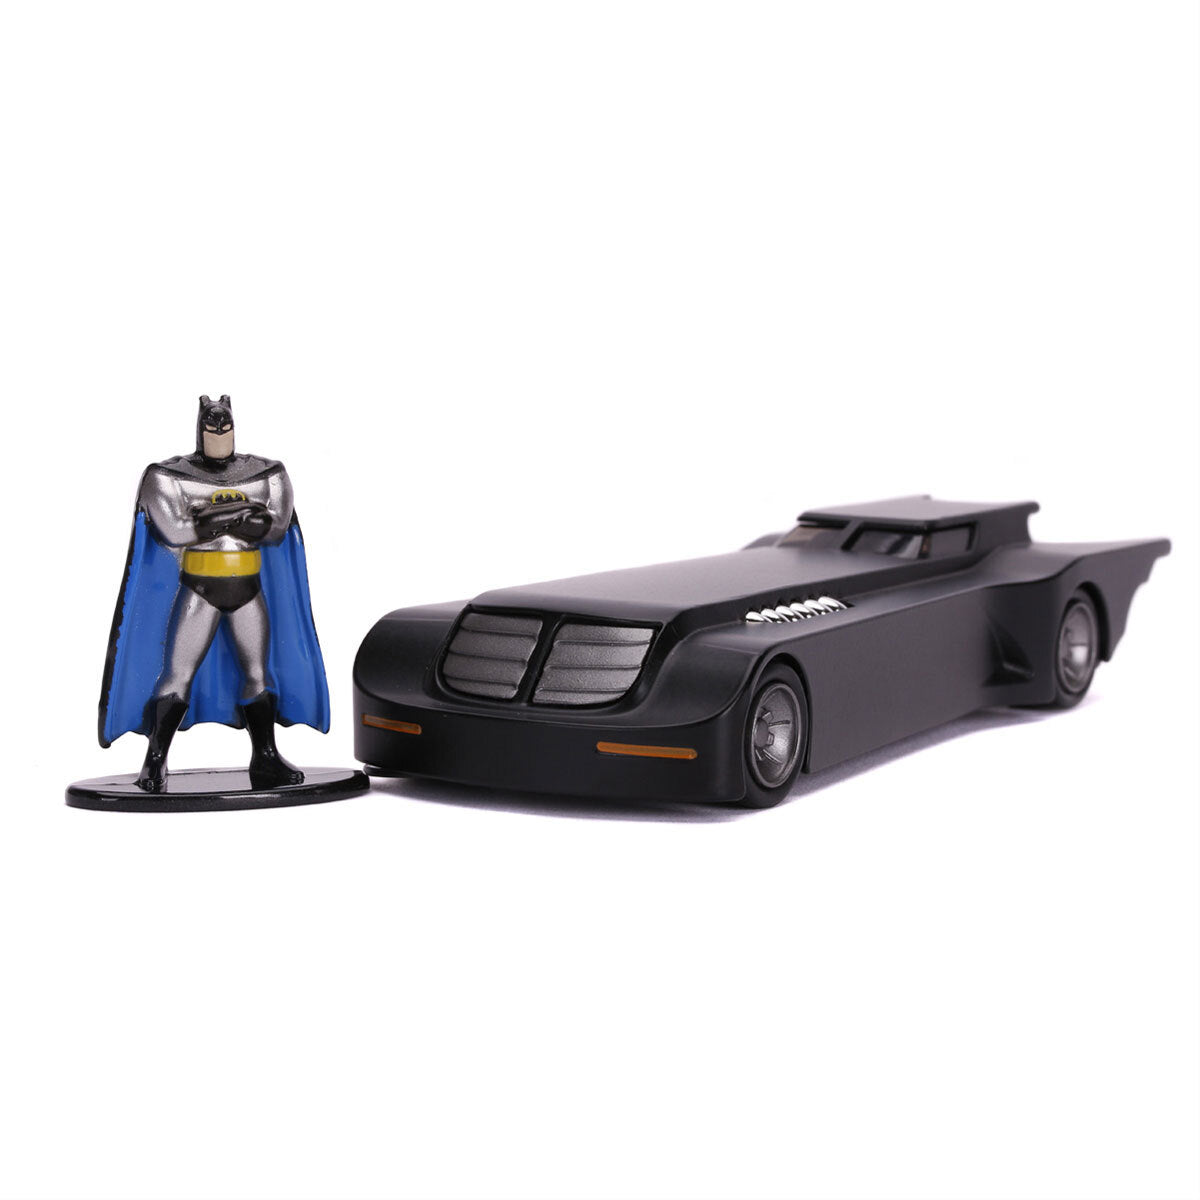 Batman 1:32 Diecast Vehicle with Figure (Styles Vary)